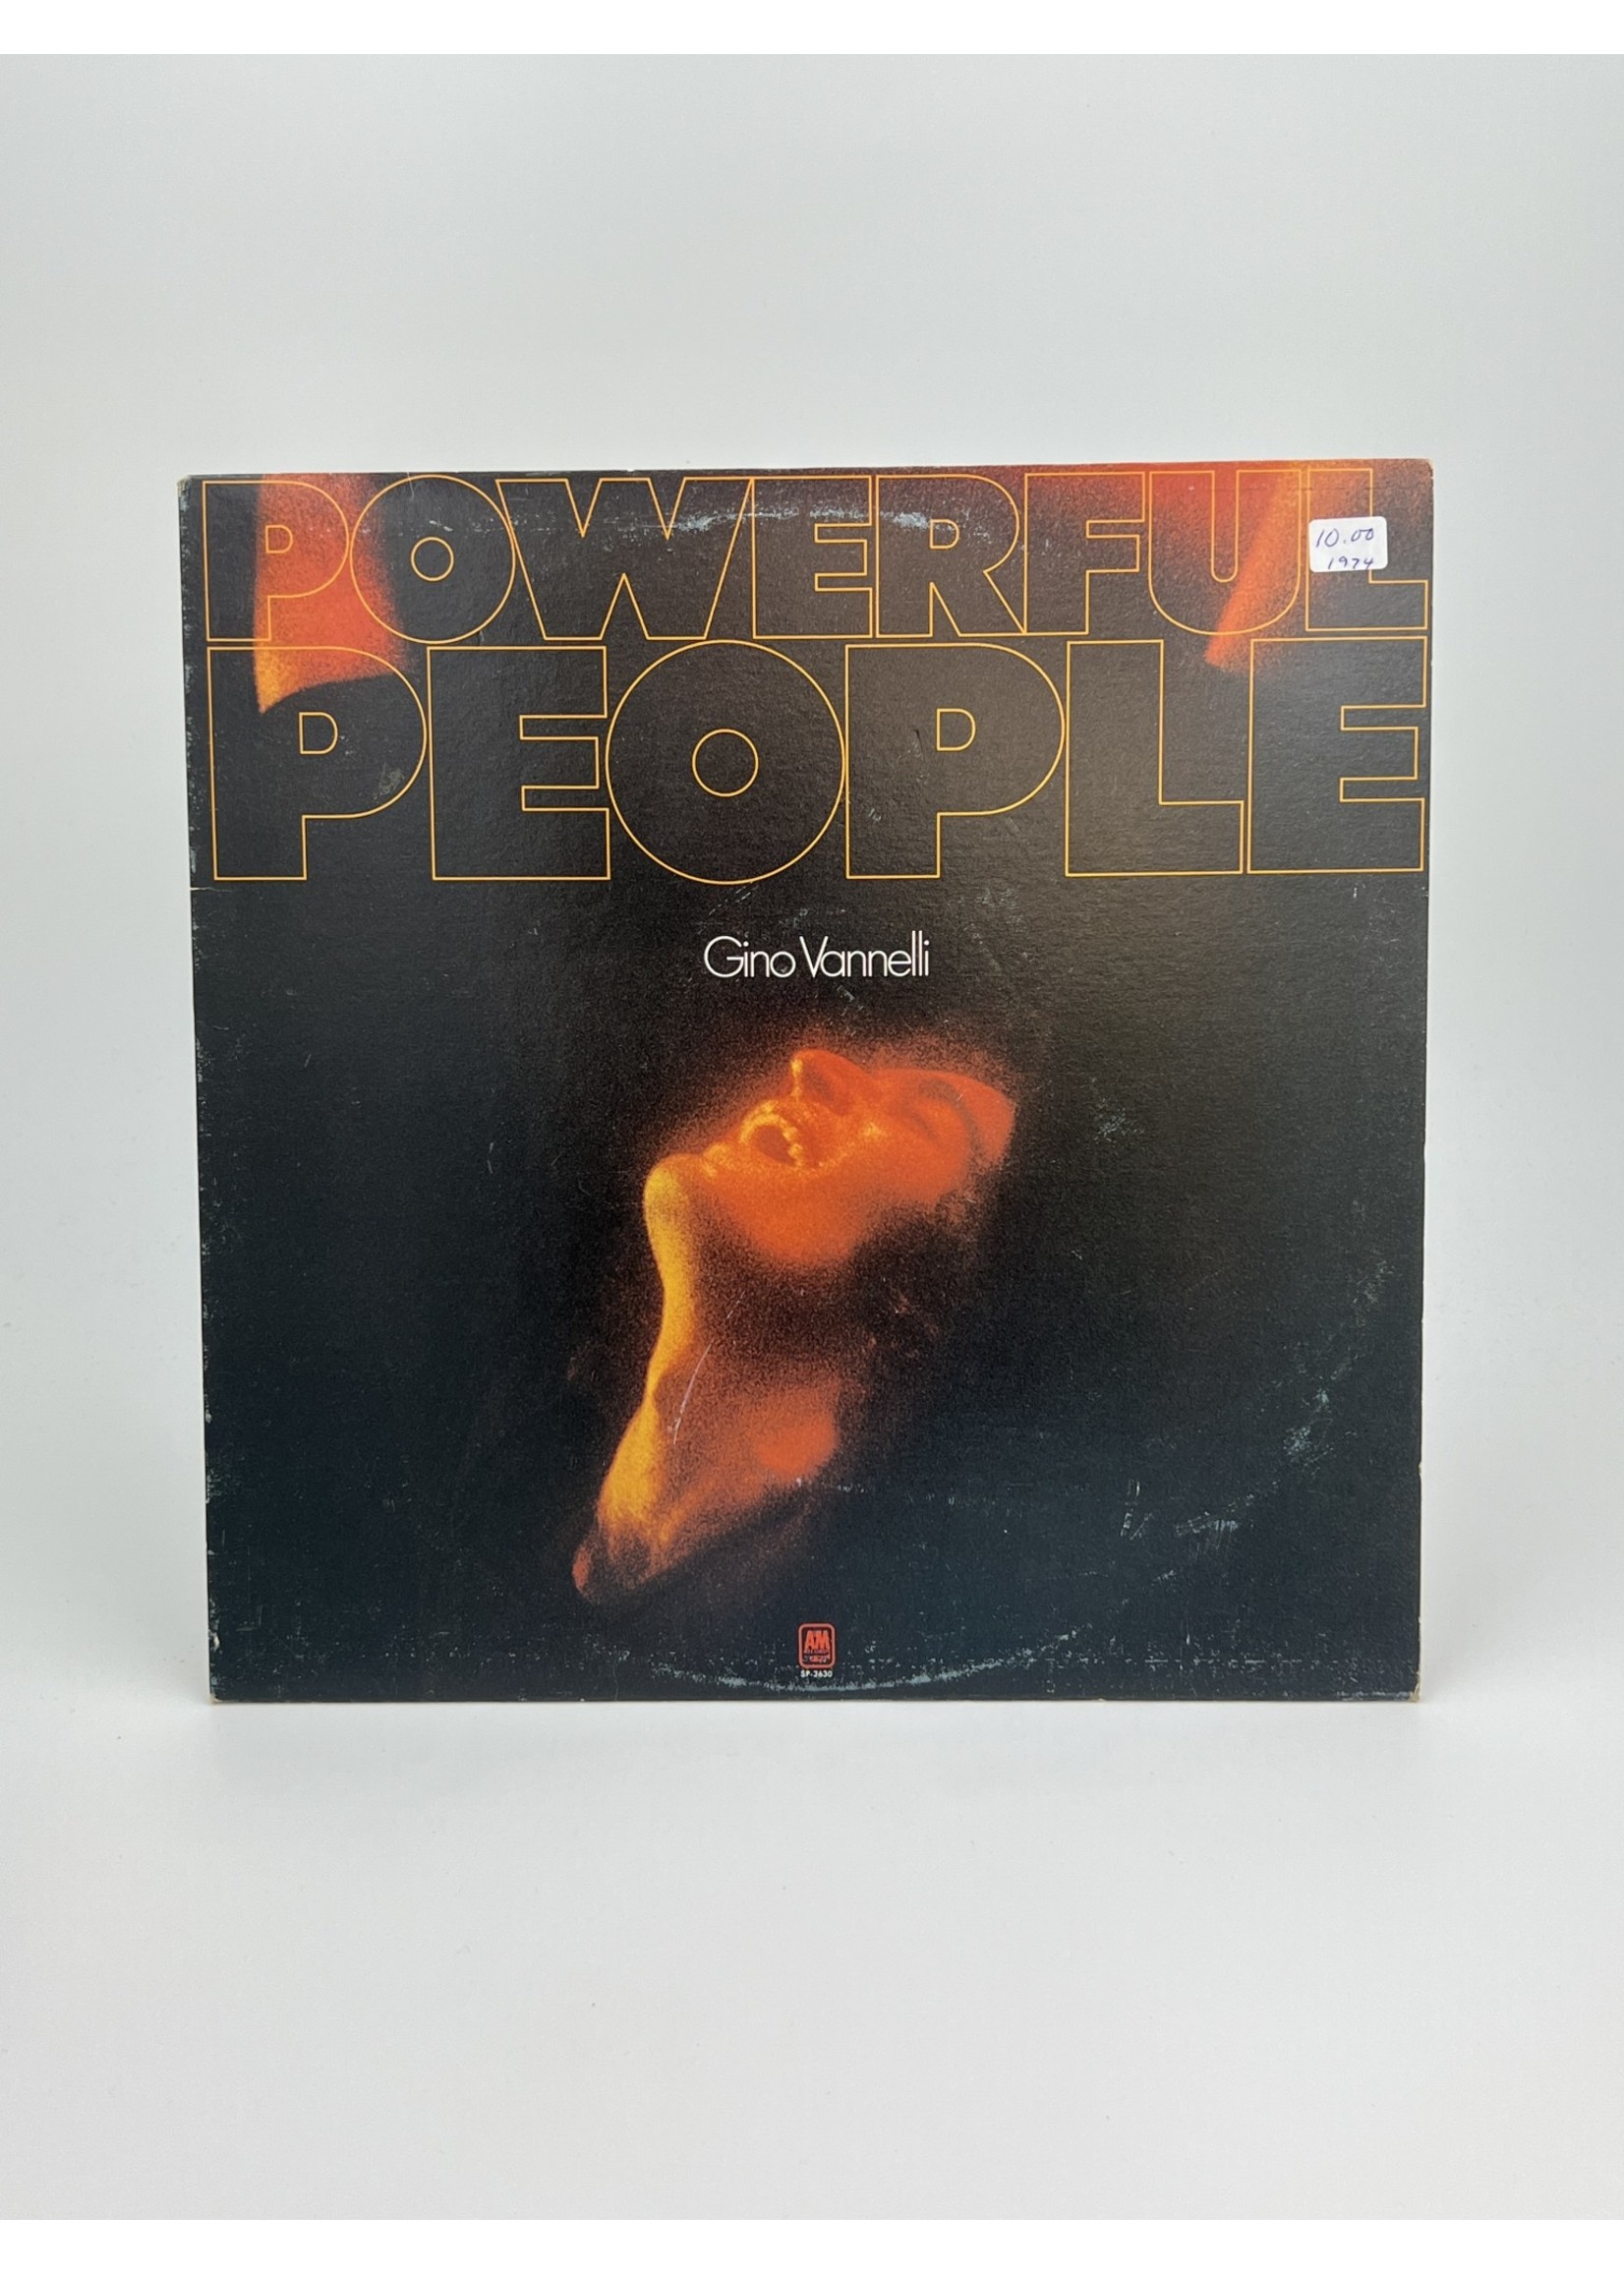 LP Gino Vannelli Powerful People LP Record